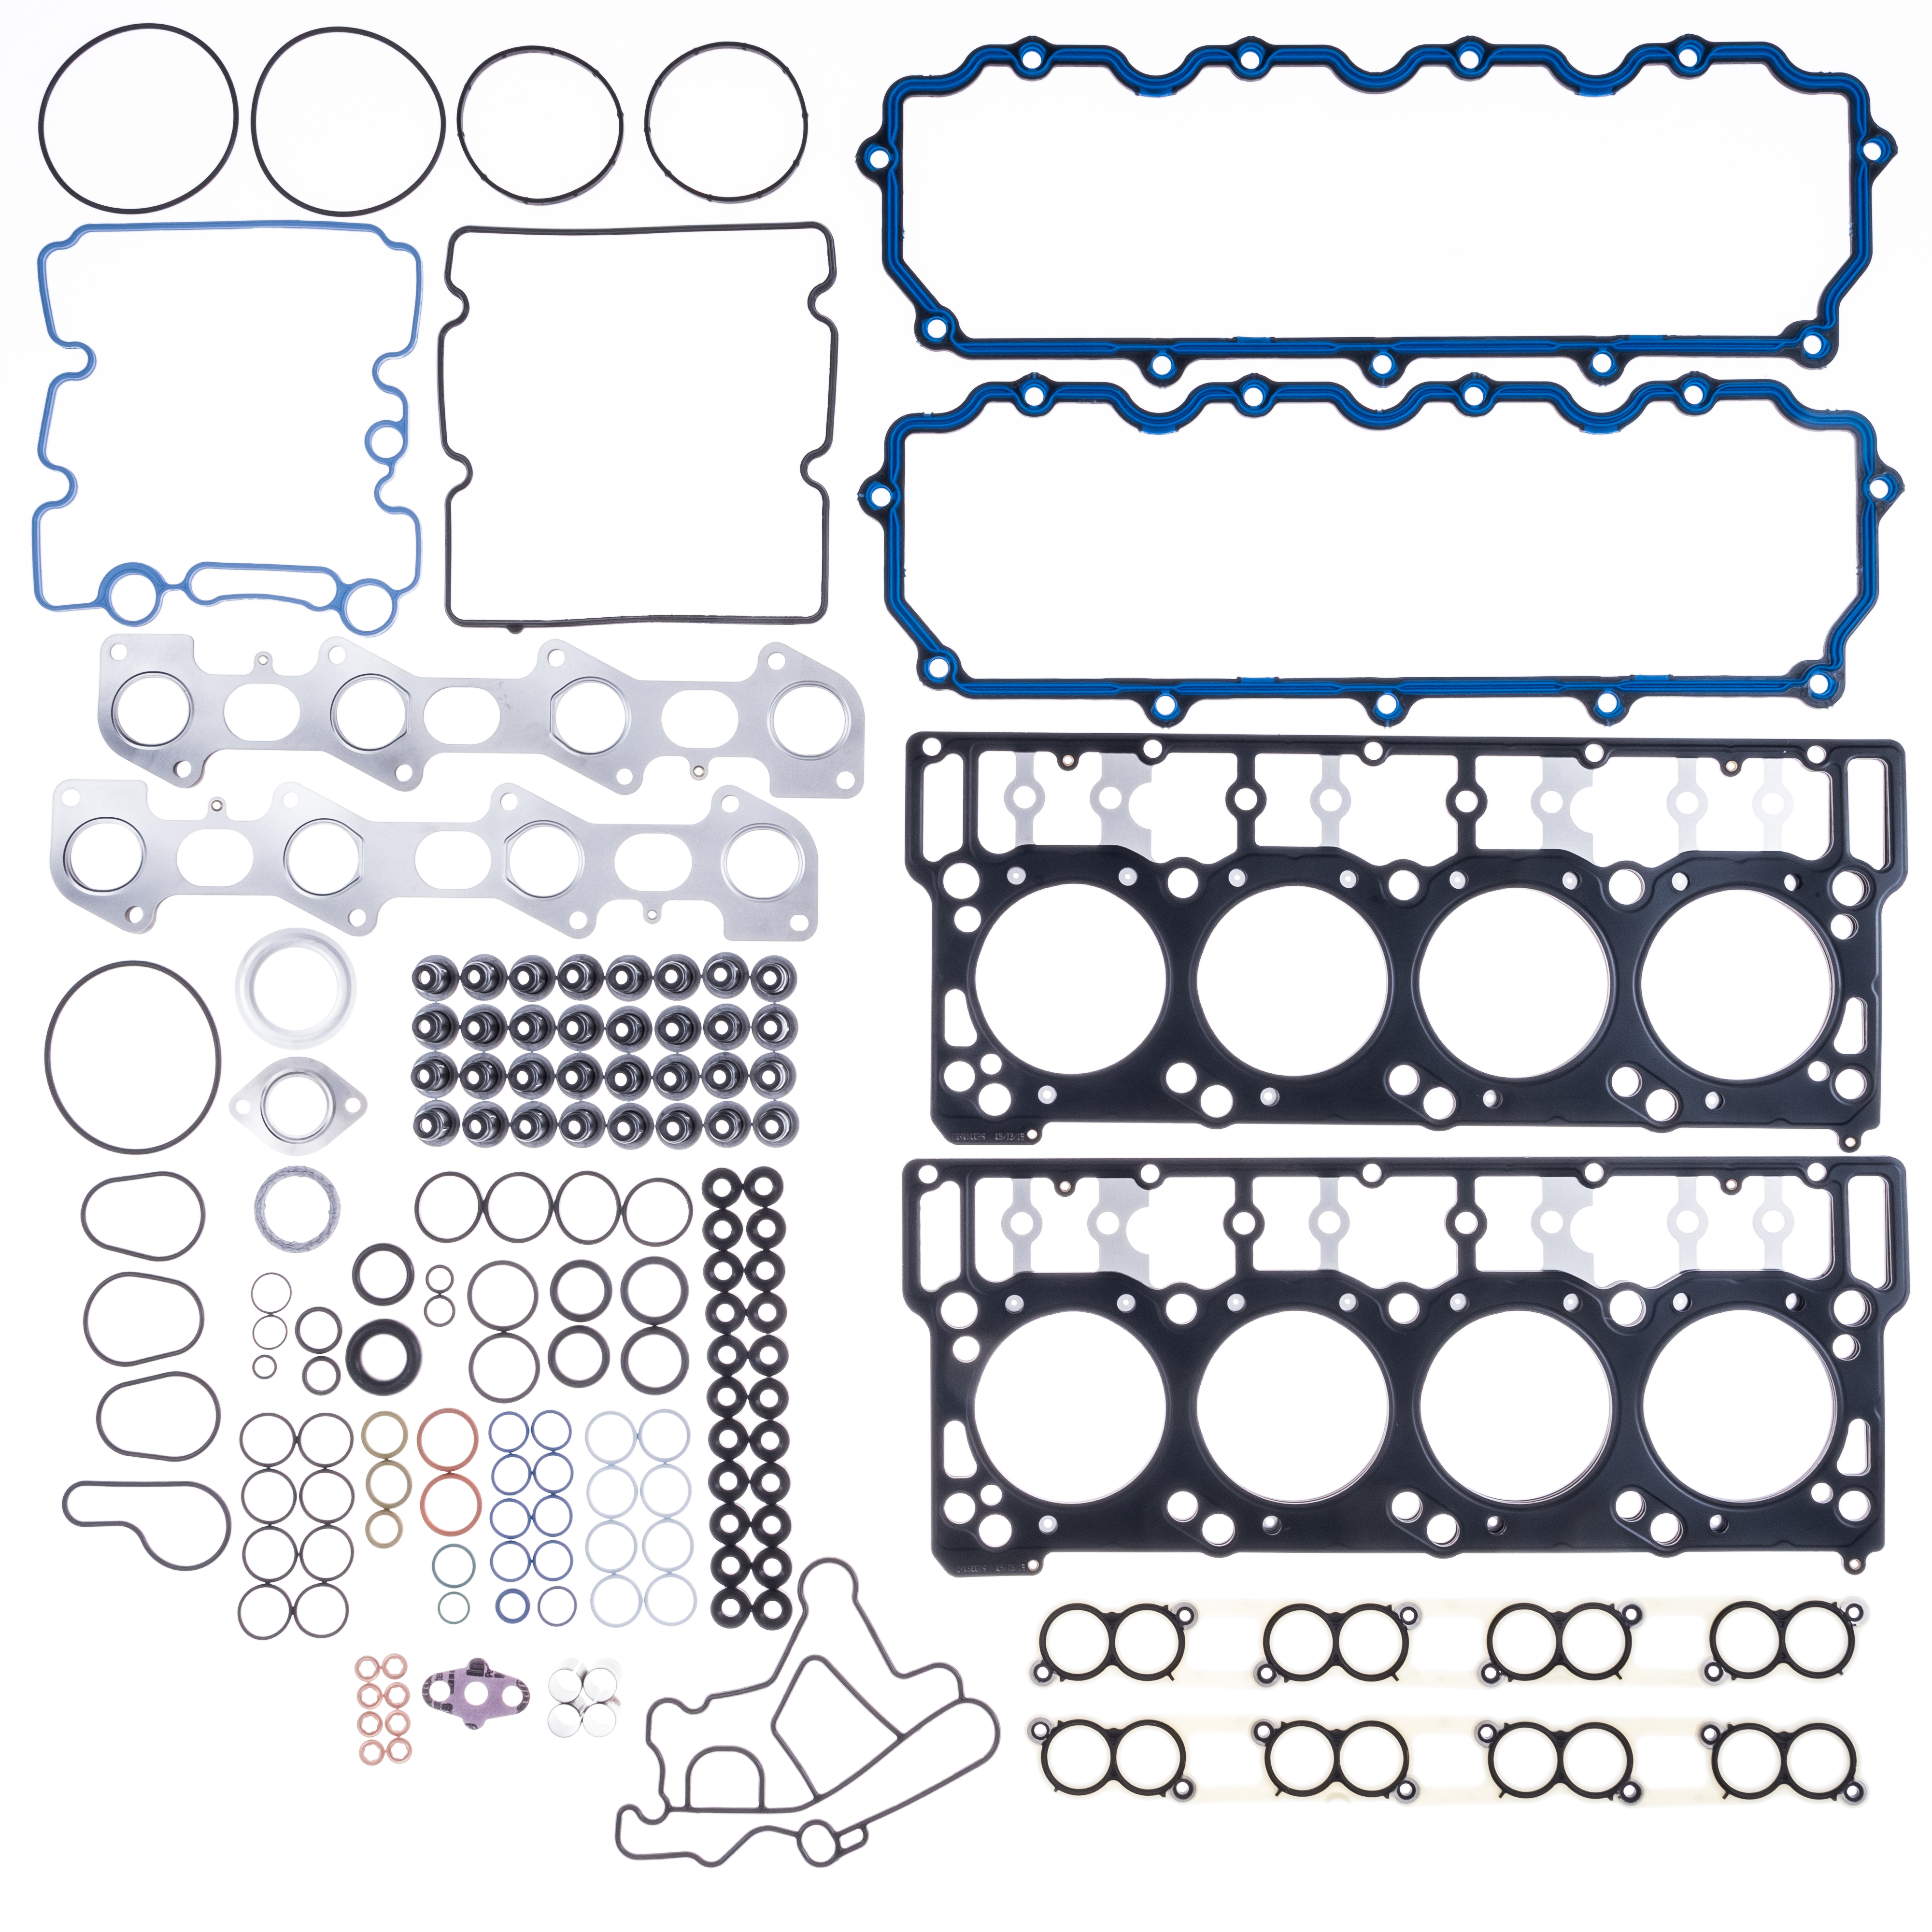 Cometic Gasket Automotive Pro3005t Top End Gasket Kit Fits select: 2004-2006 FORD F250, 2003-2006 FORD F350 - image 3 of 5